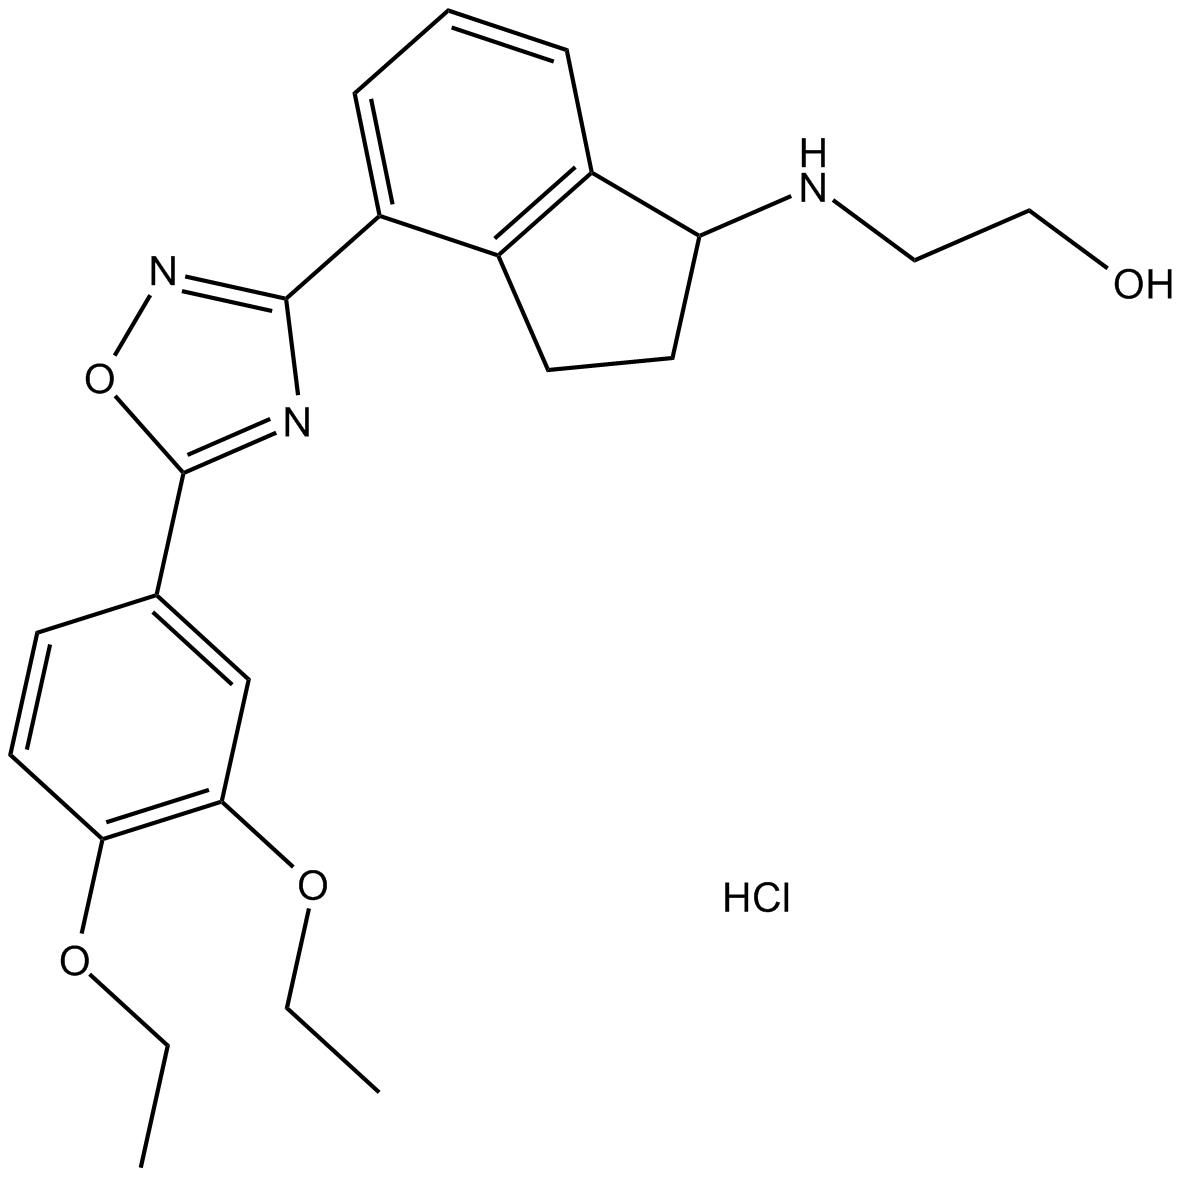 CYM 5442 hydrochloride  Chemical Structure